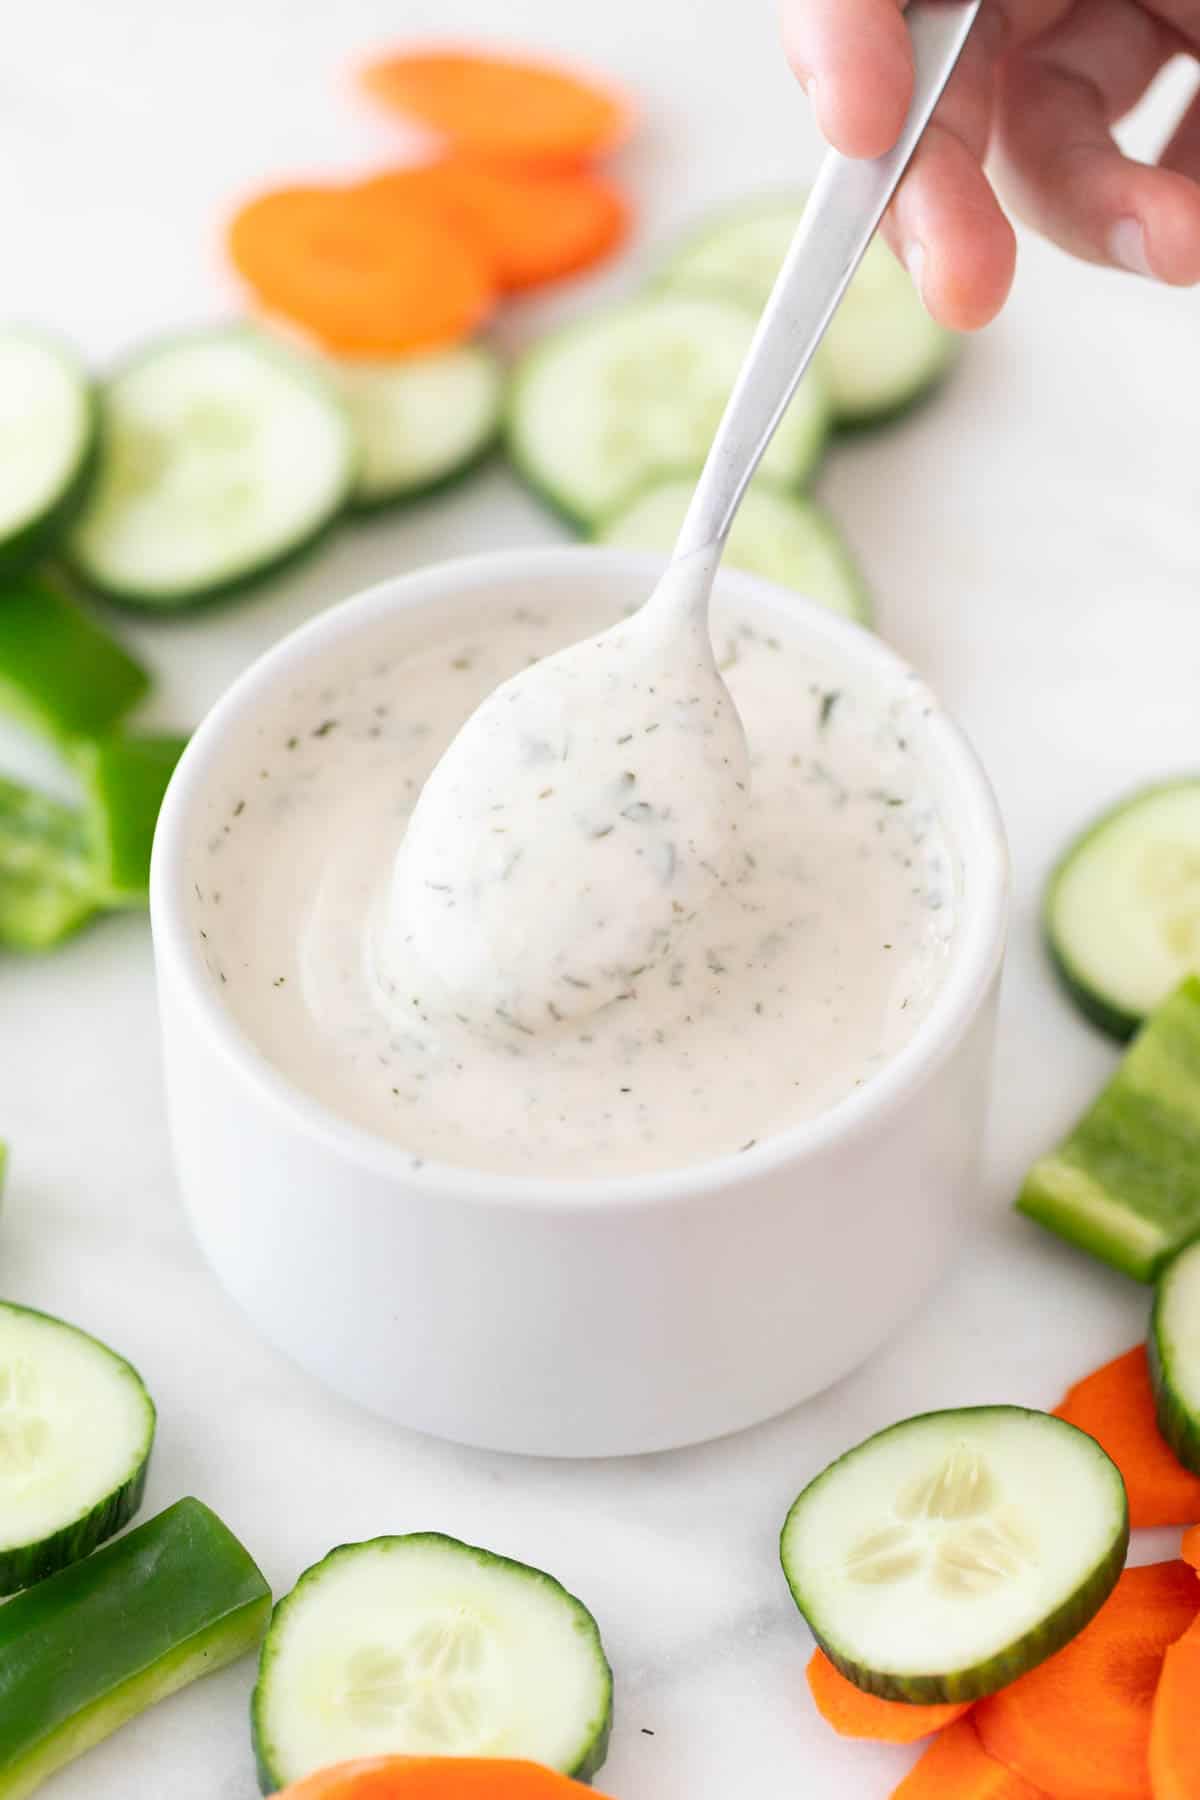 A hand dipping a spoon into a bowl of vegan ranch dressing surrounded by crudités.